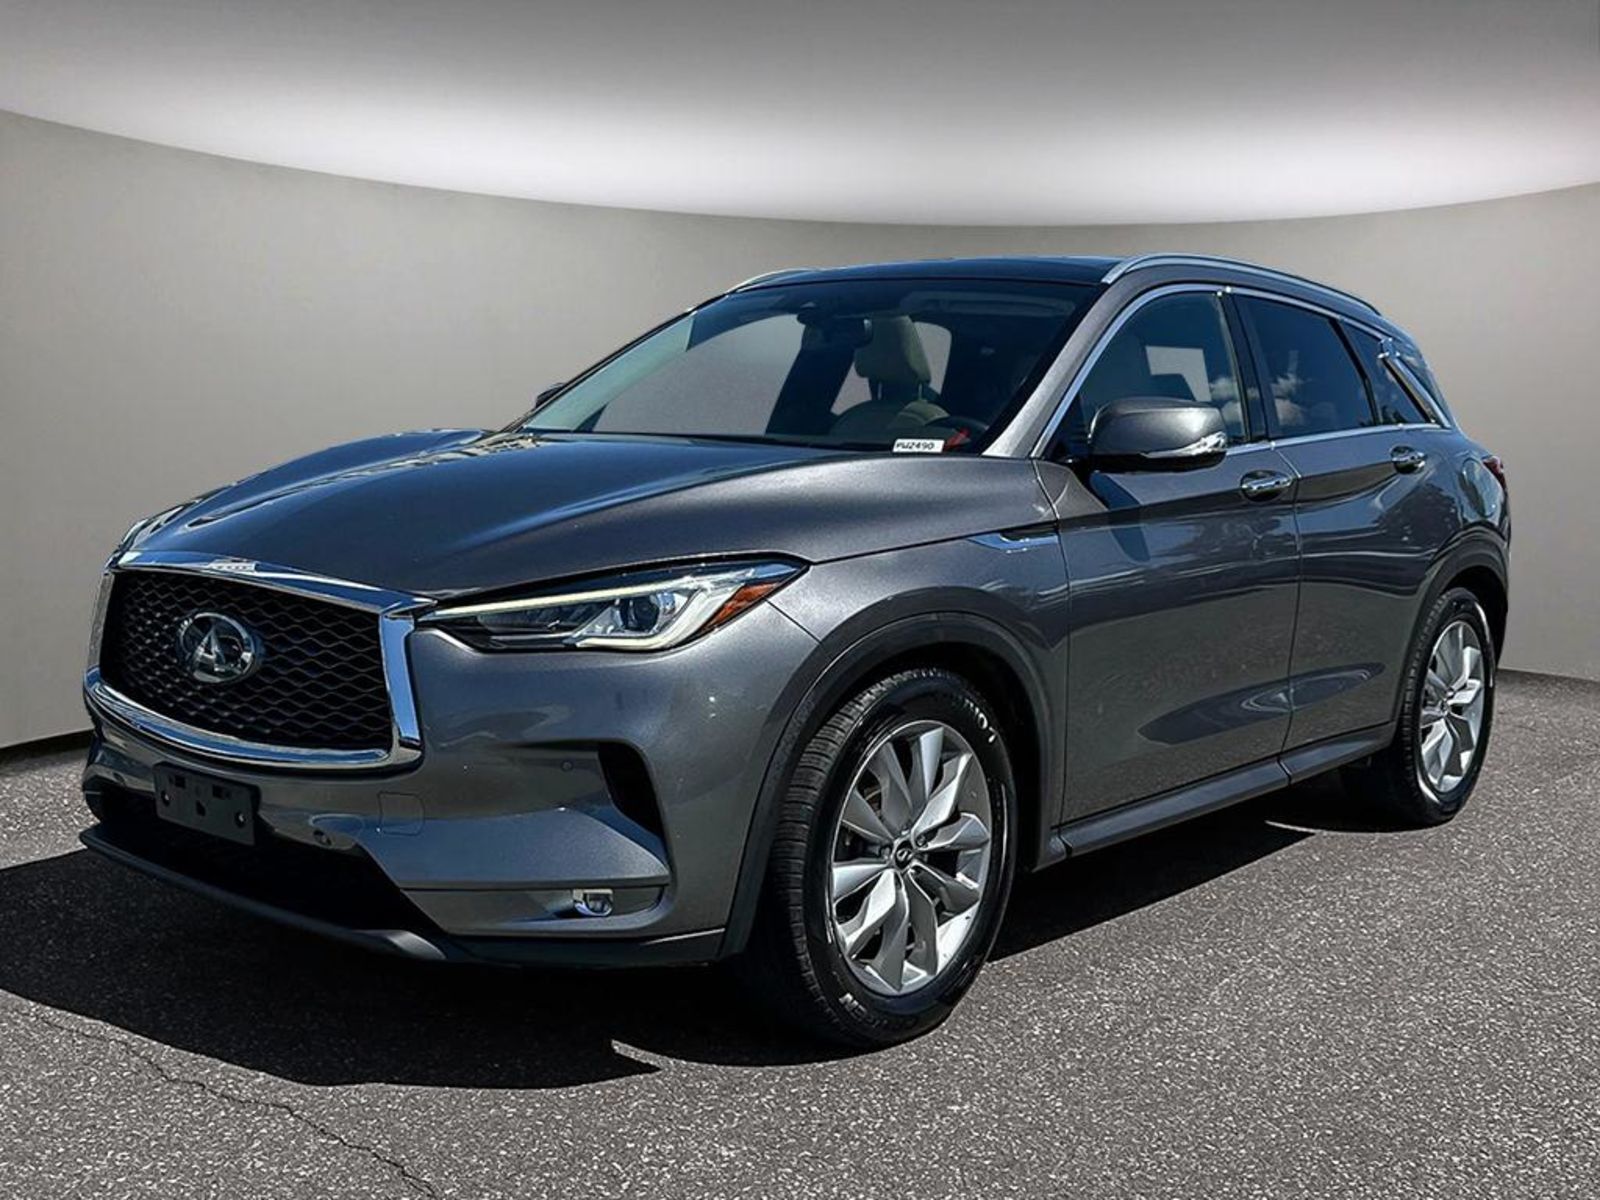 2019 Infiniti QX50 LUXE - AWD / Leather / Pano Sunroof / Rear View Ca